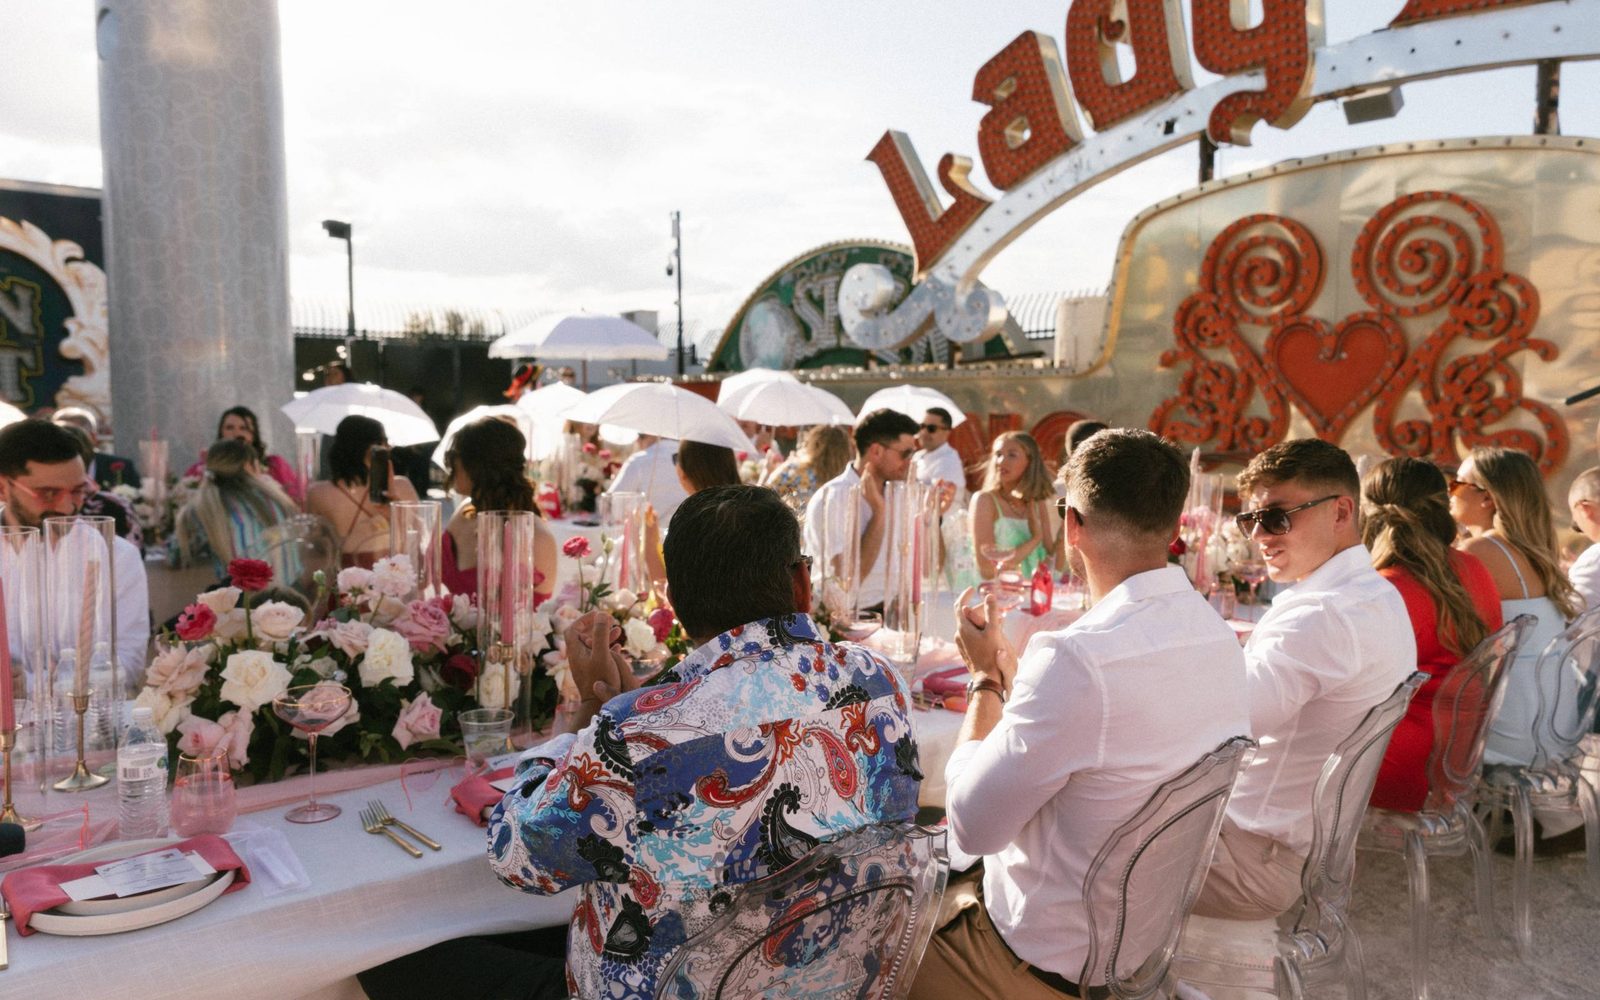 A group of people at a catered event at The Neon Museum's North Gallery.